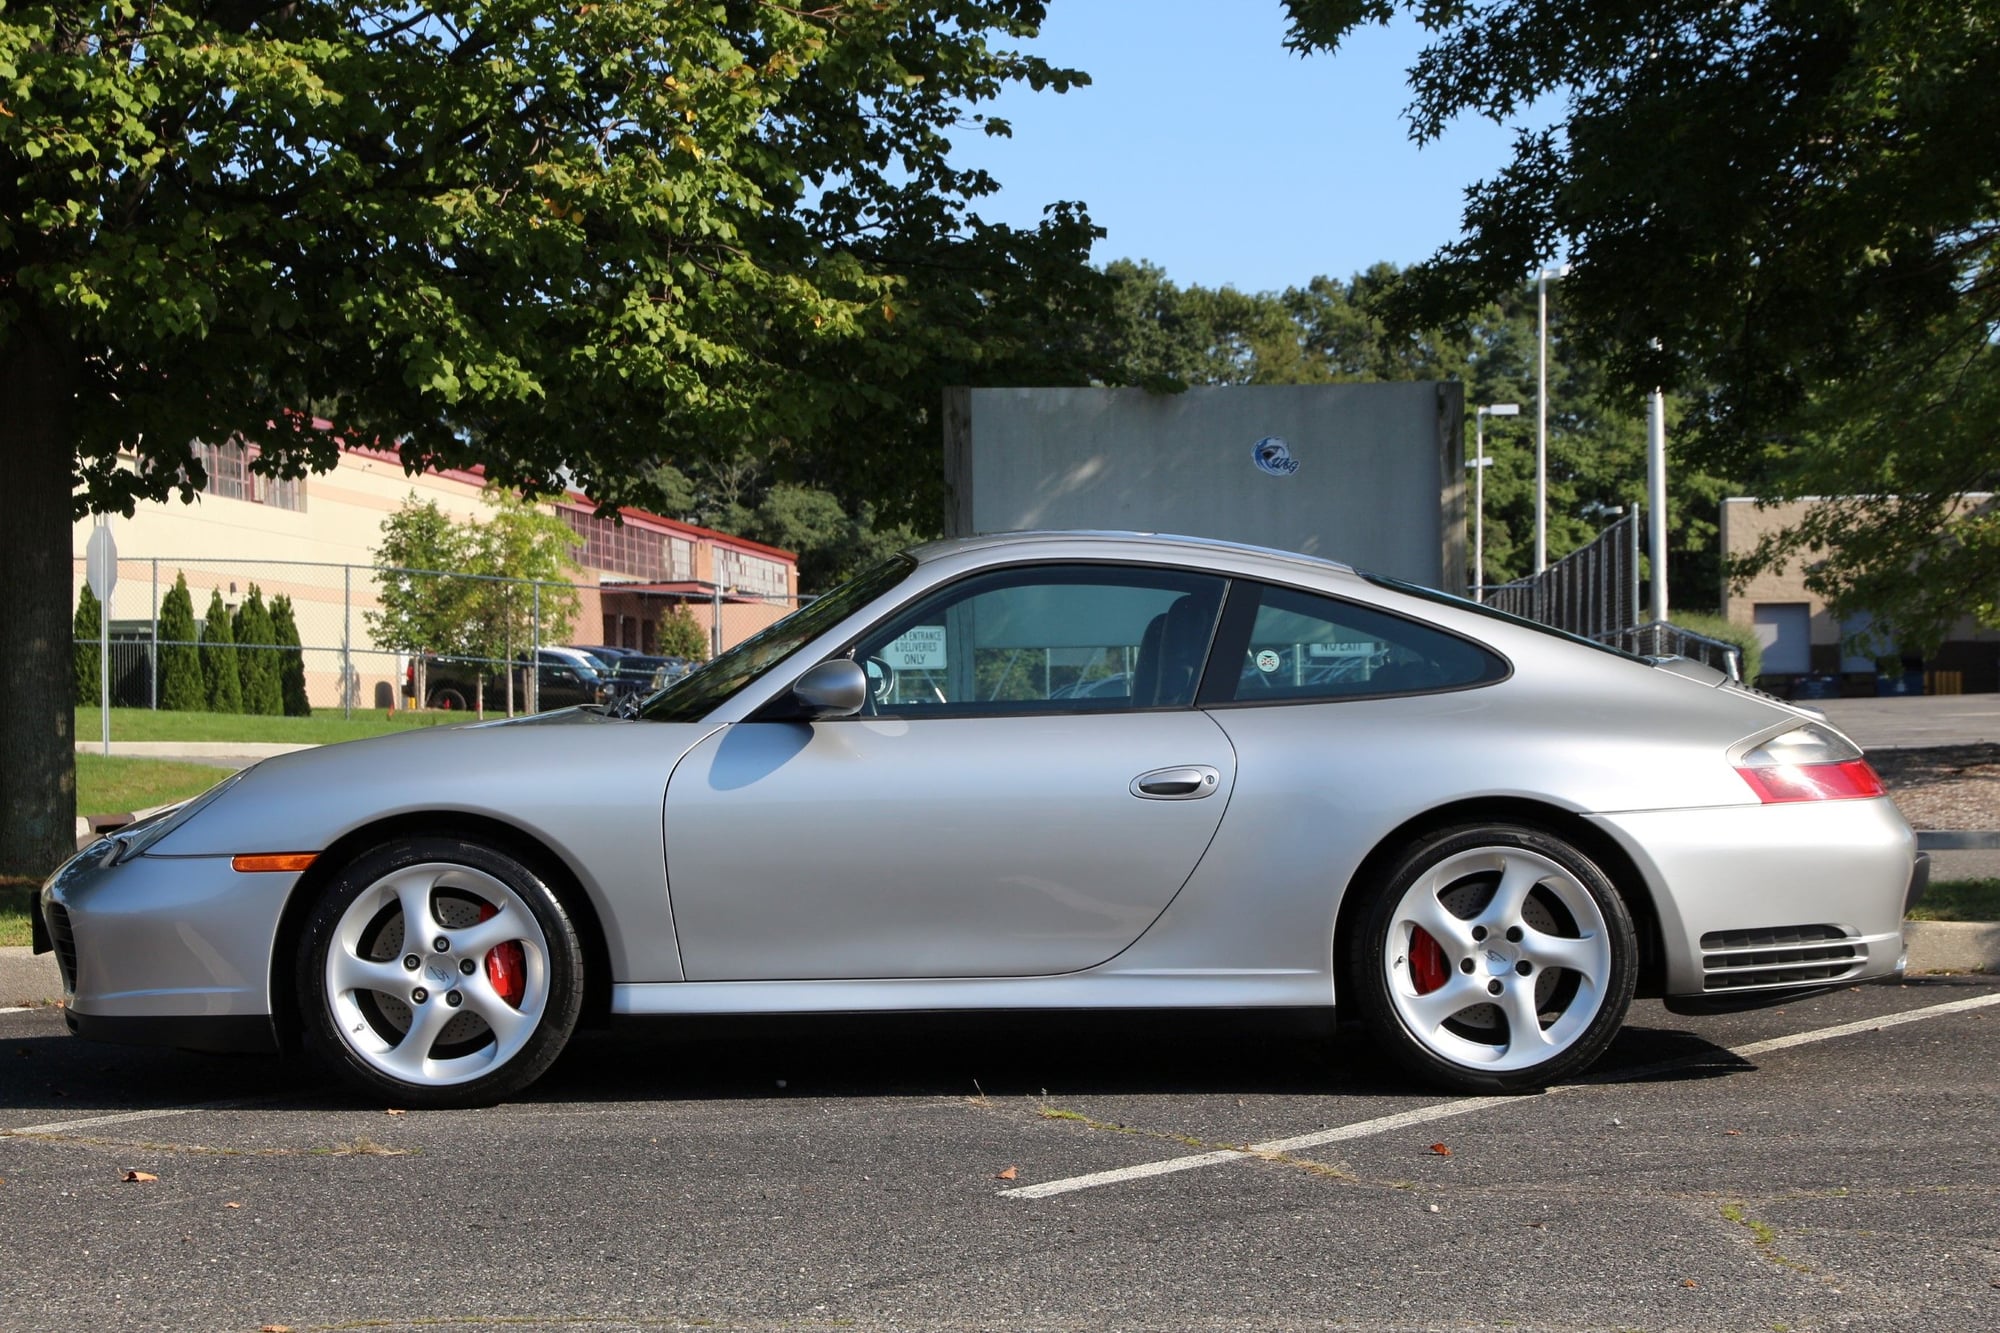 2003 Porsche 911 -  - Used - VIN WP0AA29903S620595 - 61,030 Miles - 6 cyl - AWD - Manual - Coupe - Silver - Brooklyn, NY 11229, United States